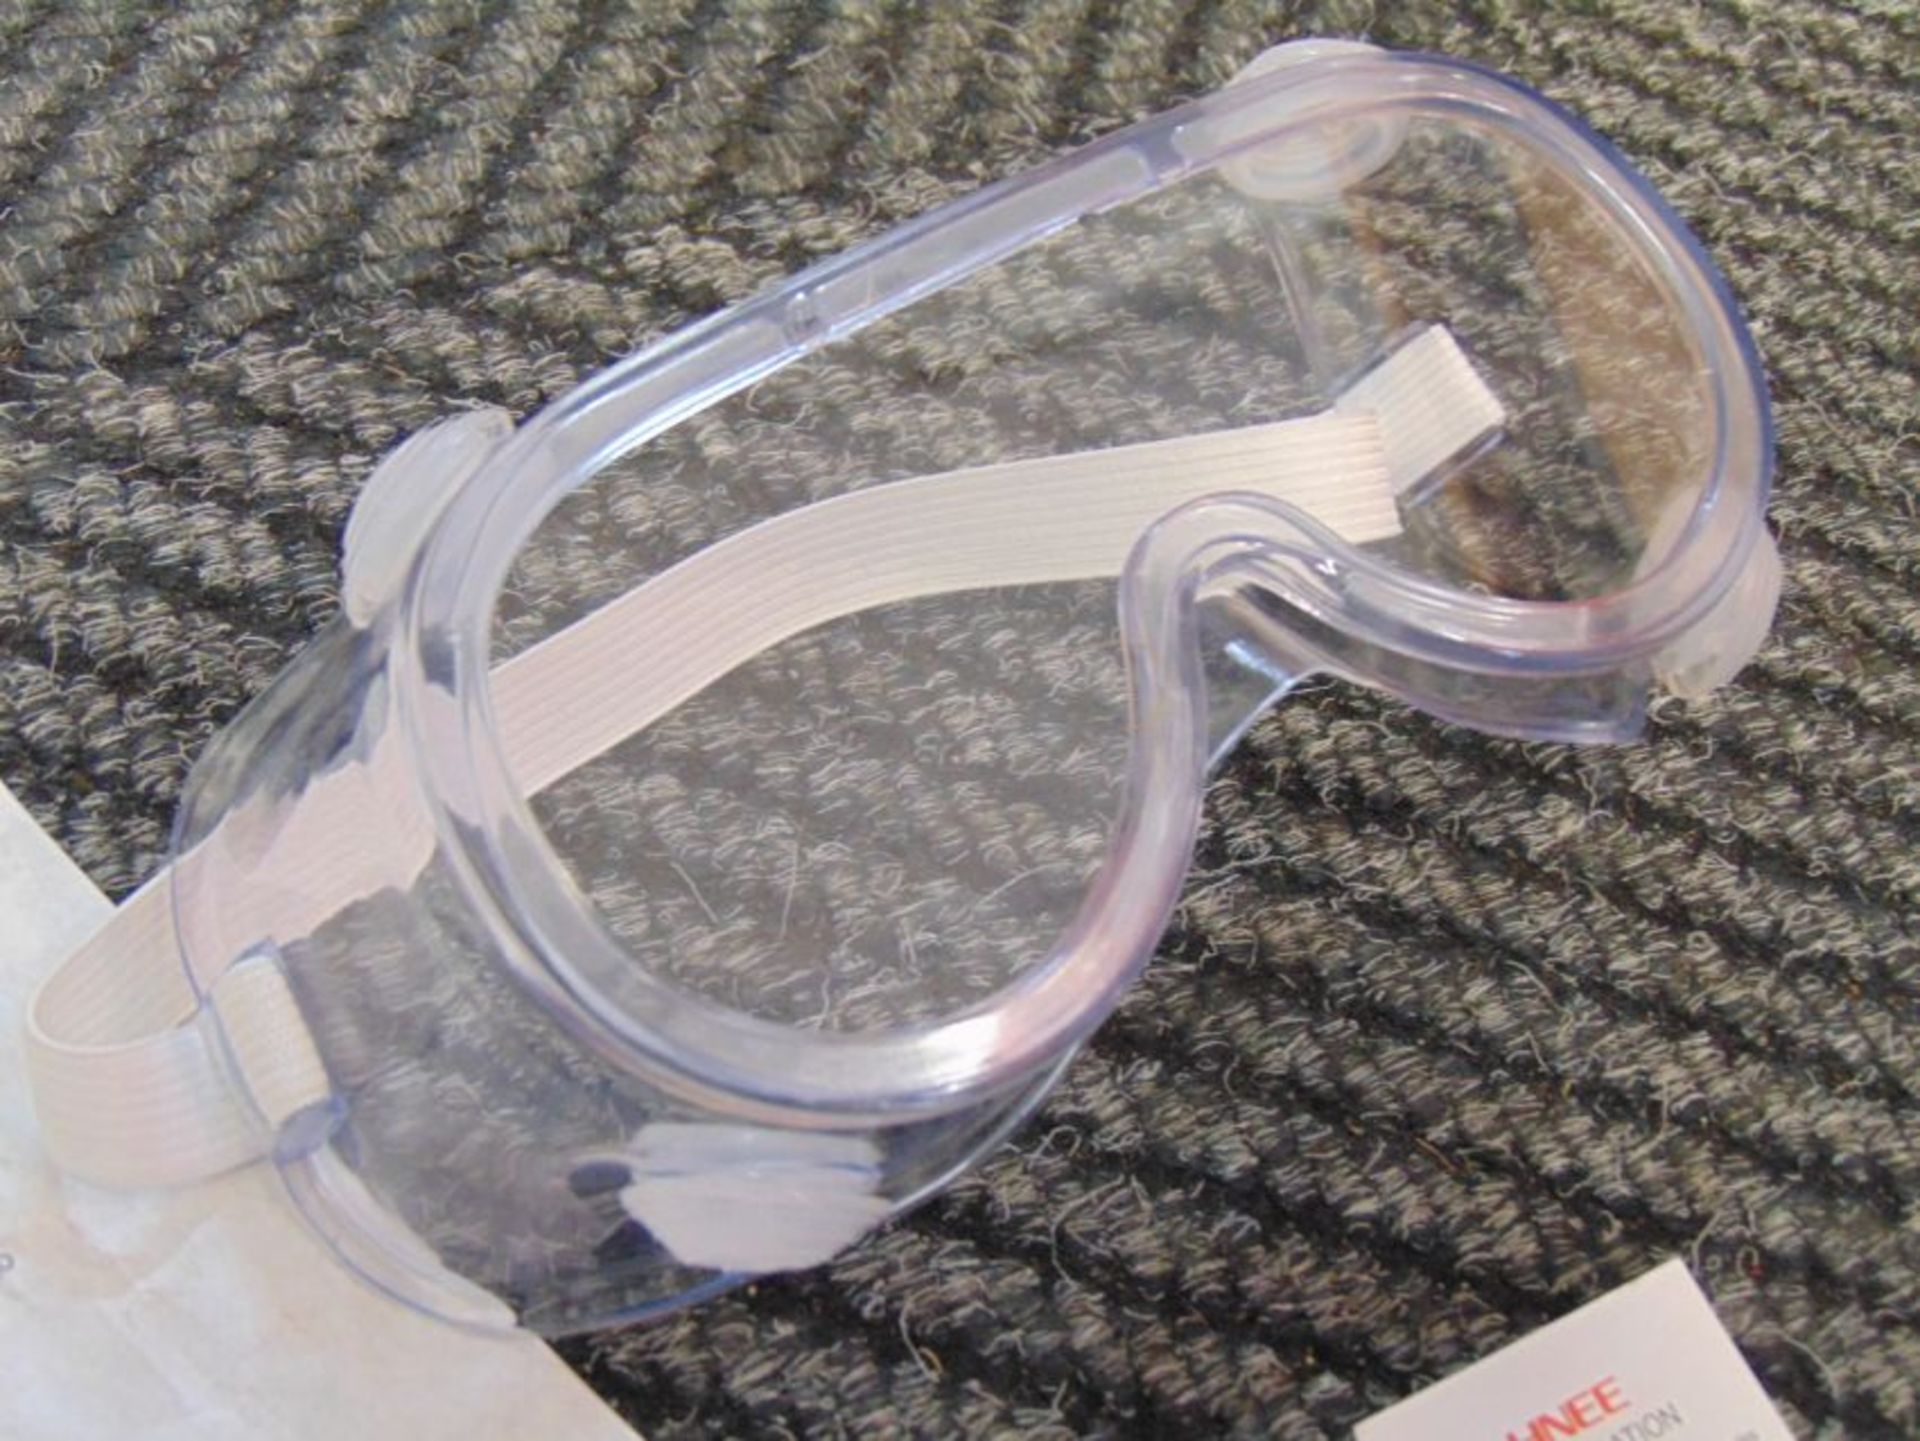 80 x NEW UNISSUED Safety goggles GLYZ1-1 - Image 7 of 15